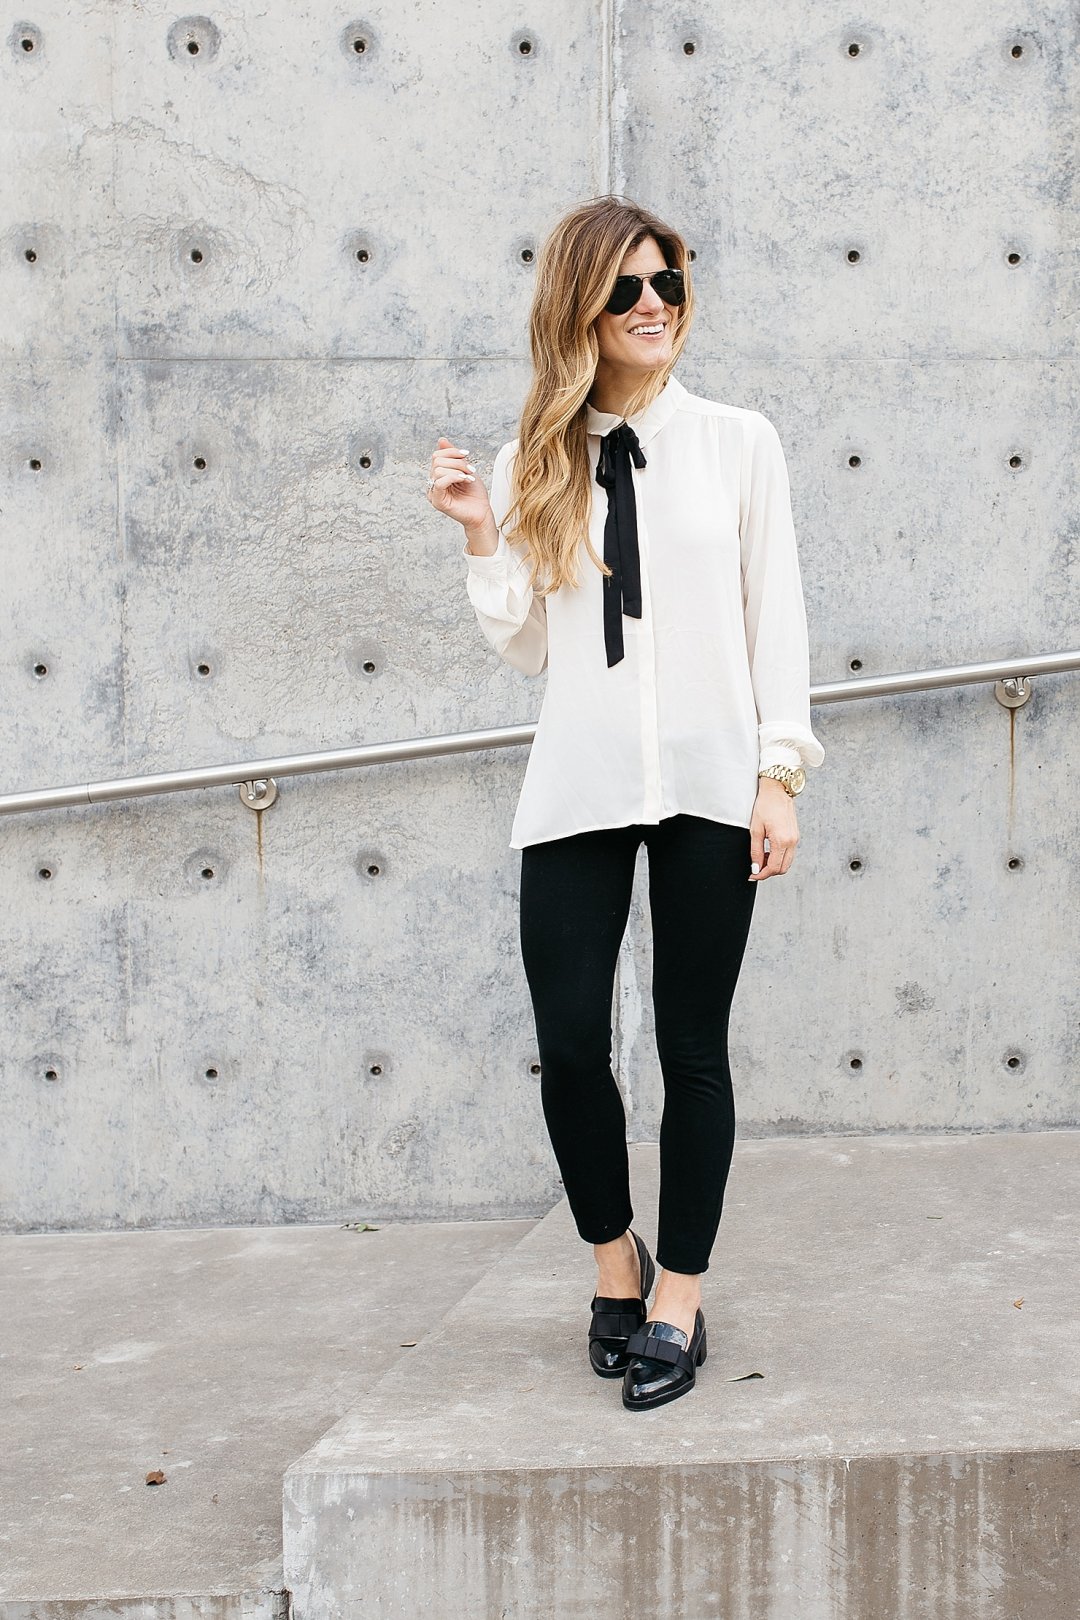 business casual outfit, what to wear to work, fall work outfit idea, office wear, work wear, outfit loafers, pussy bow blouse, summer work outfit idea, wear to work, off white blouse, black and white work outfit idea